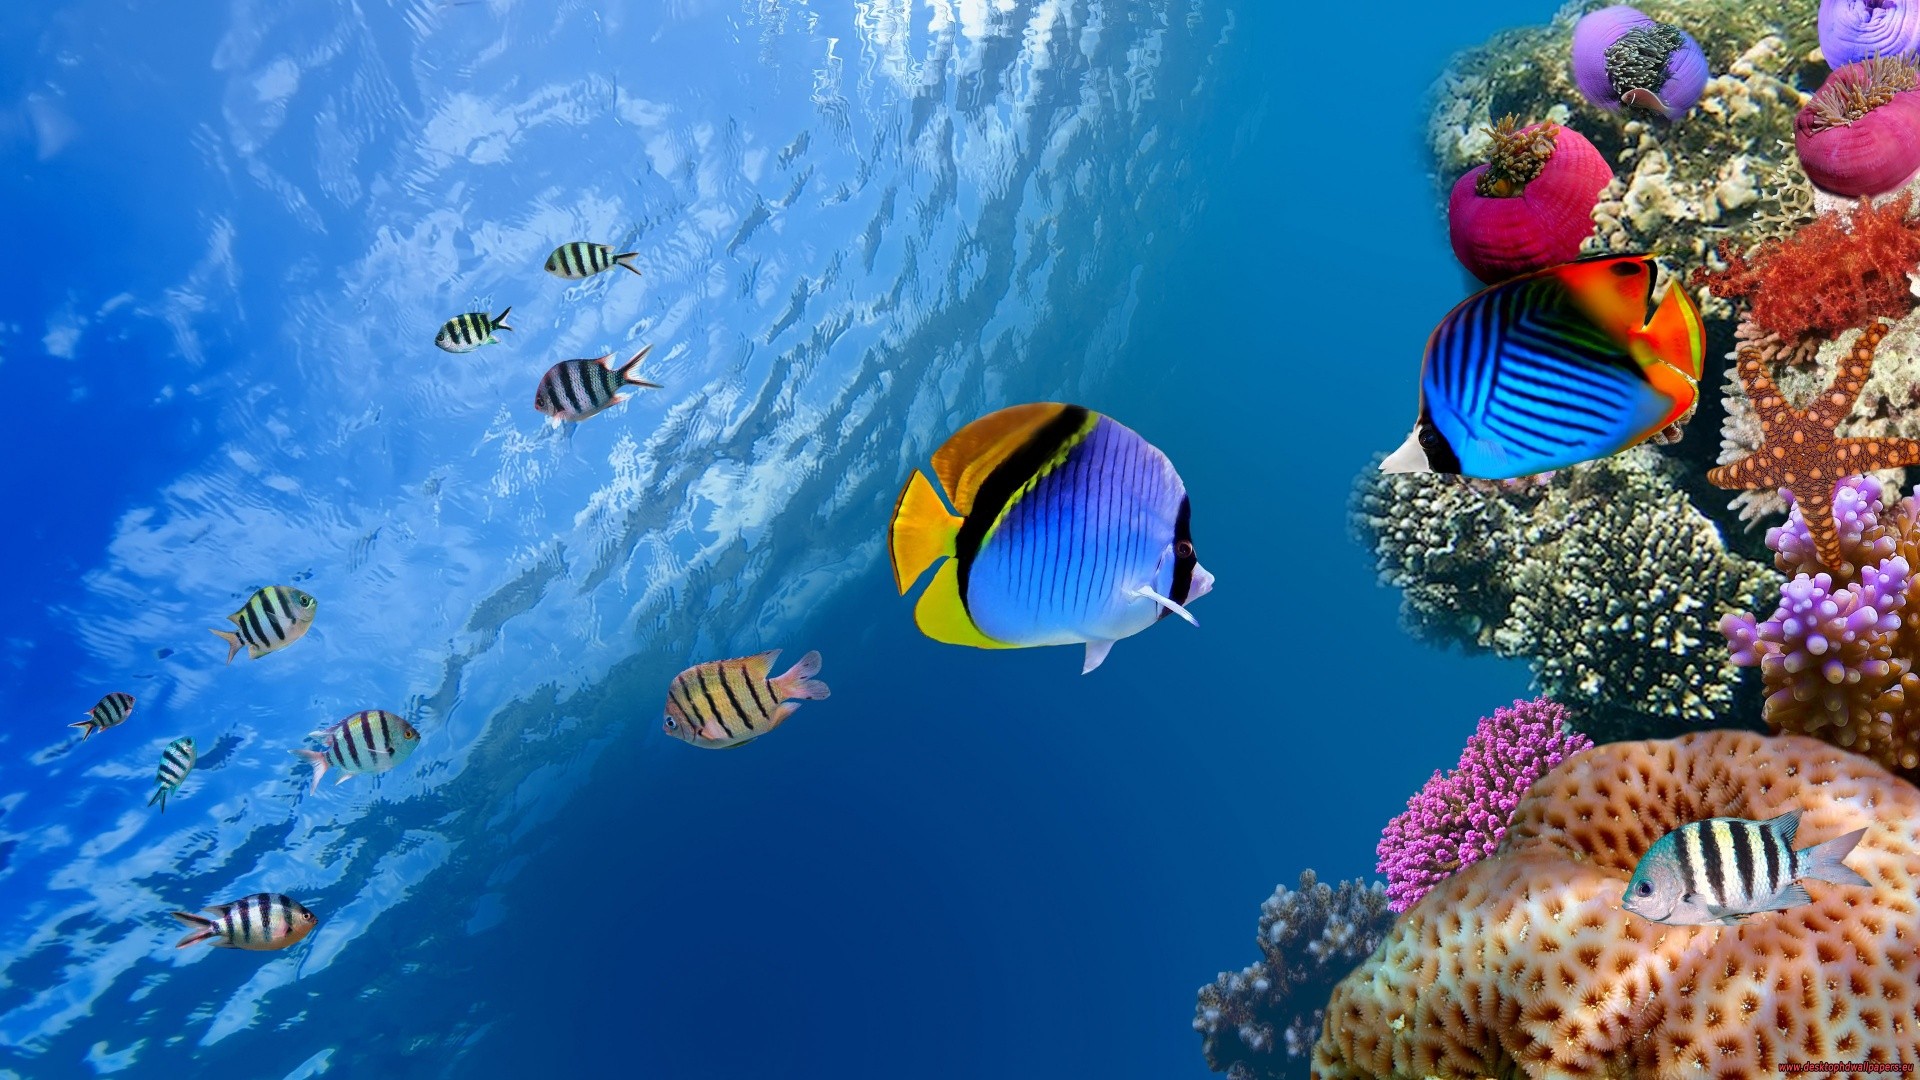 General 1920x1080 nature fish underwater photo manipulation blue water colorful sea life animals